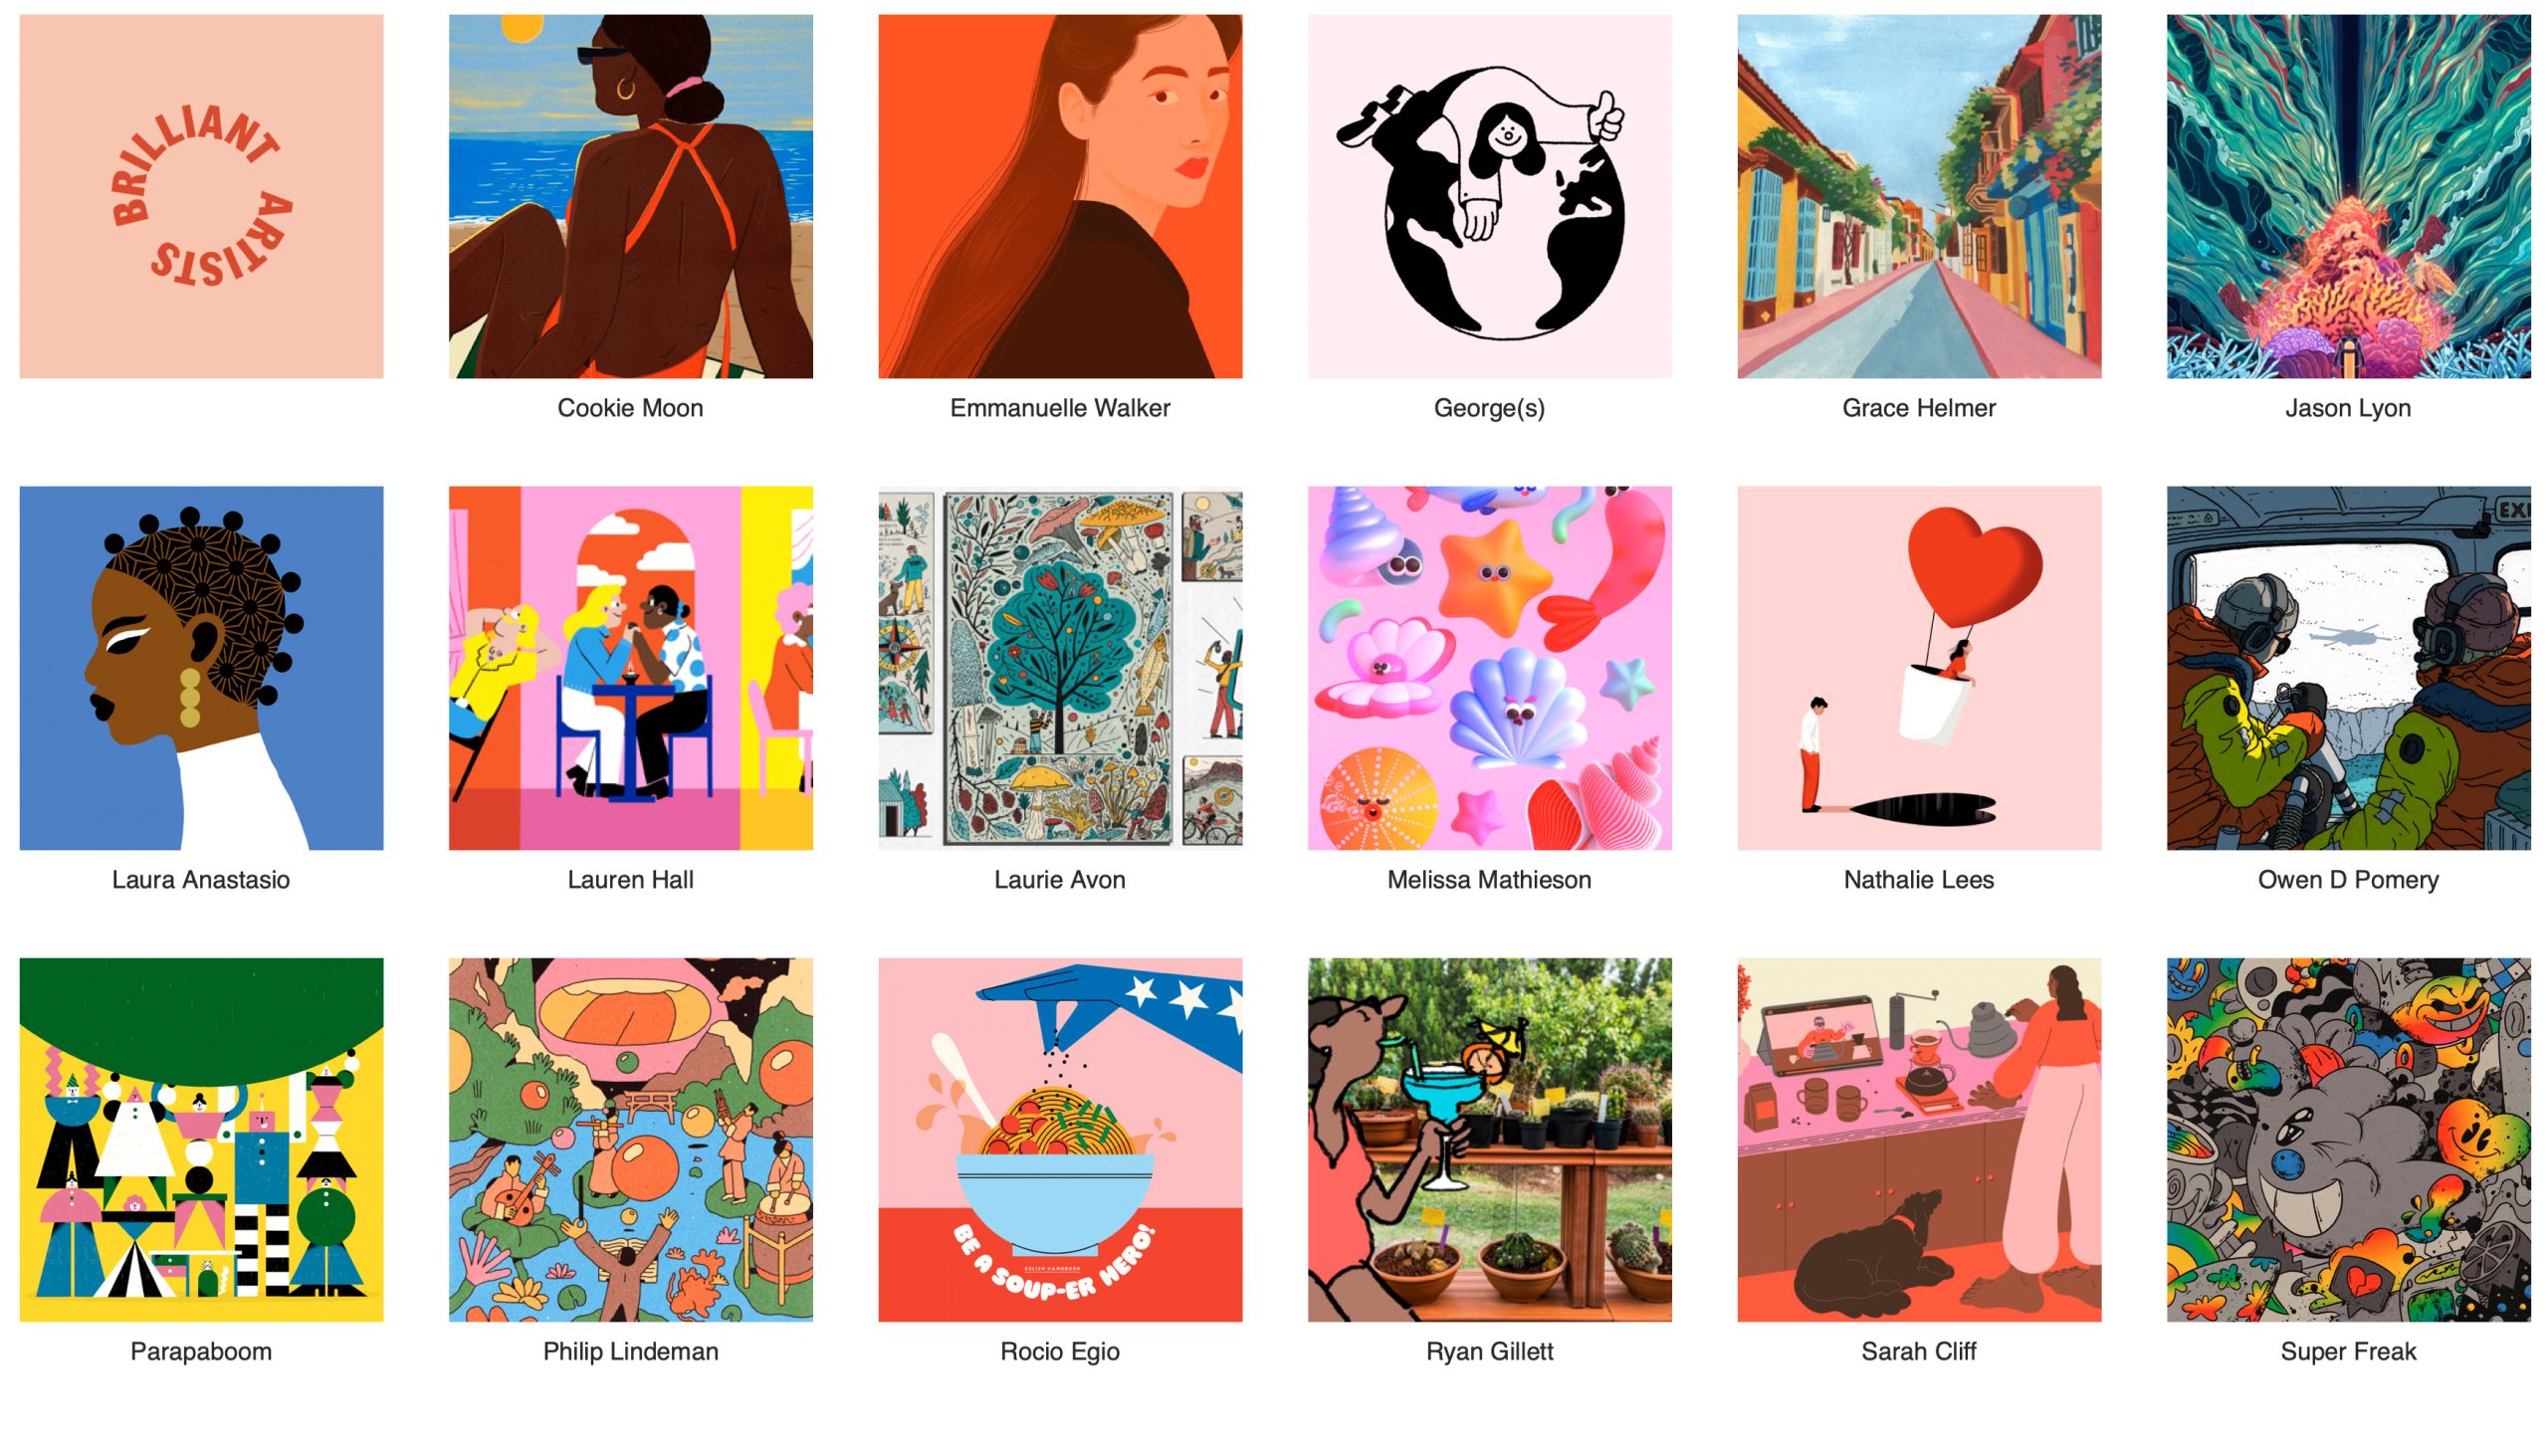 Brillant Artists is an illustration agency in the UK